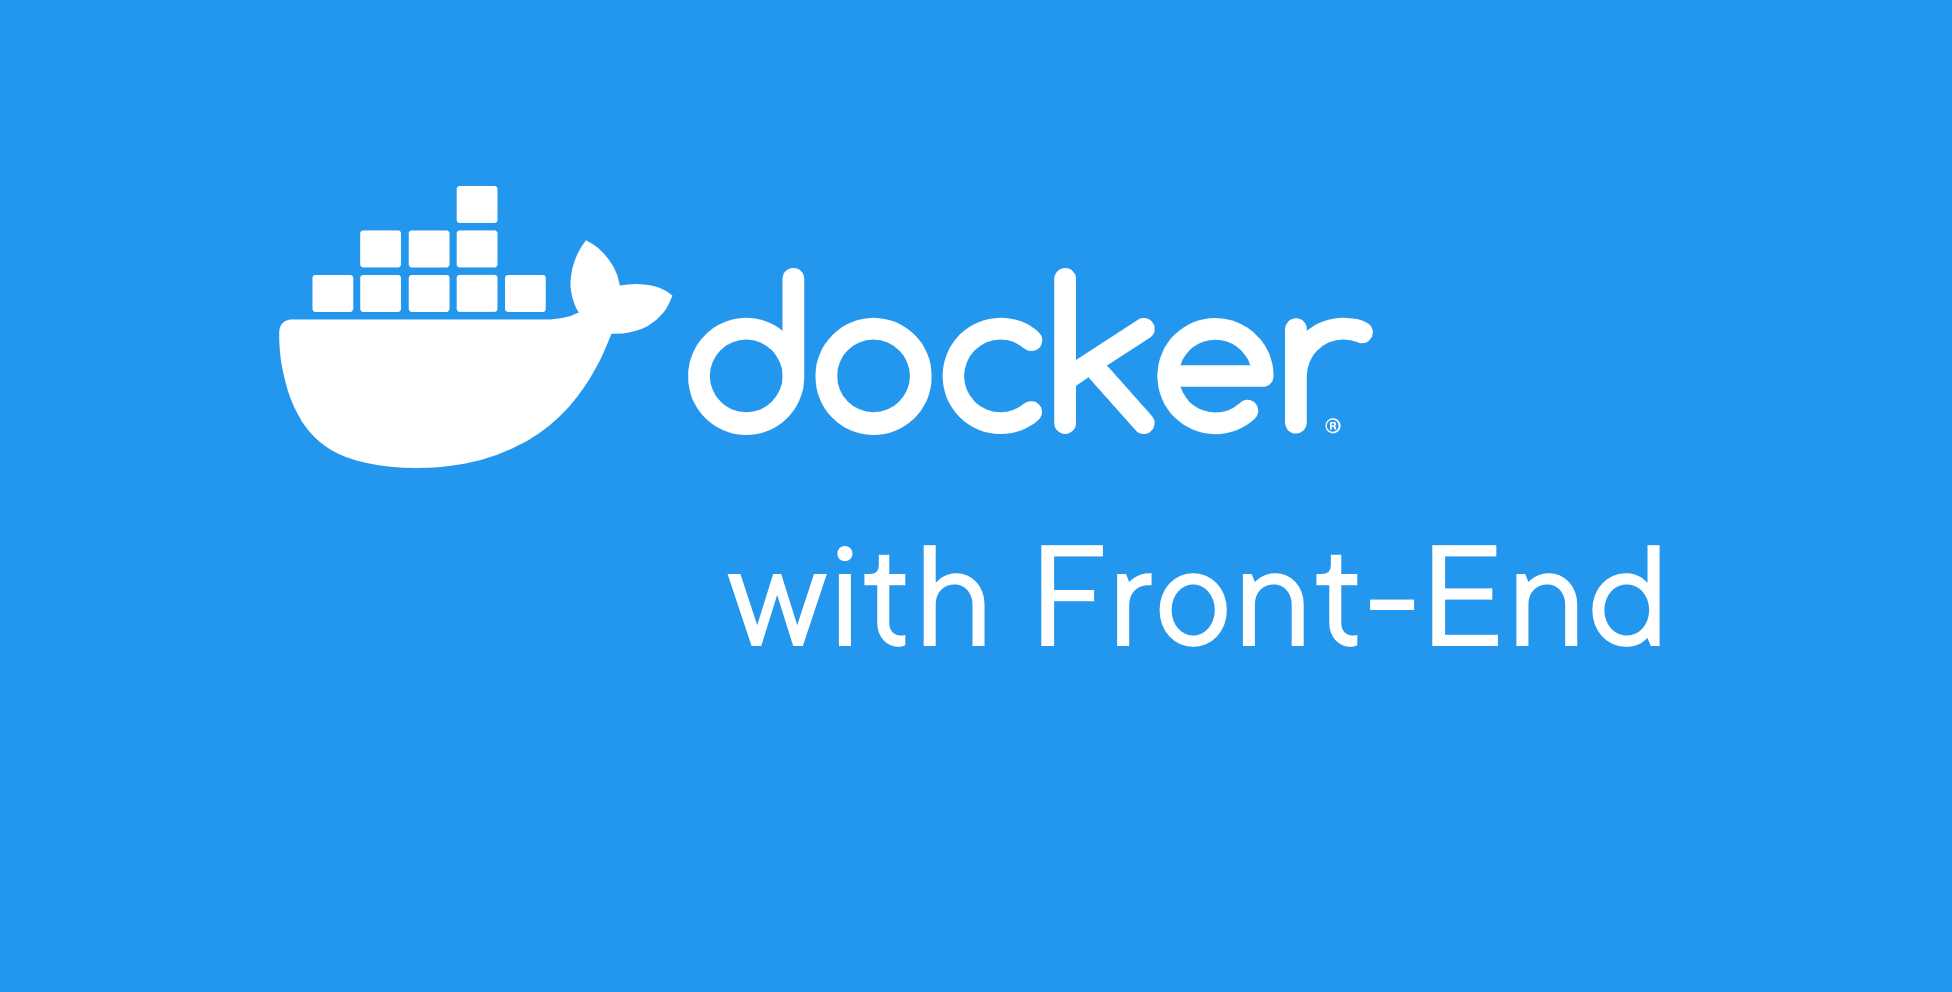 How to package front-end projects into Docker images and use it with webpack cover image